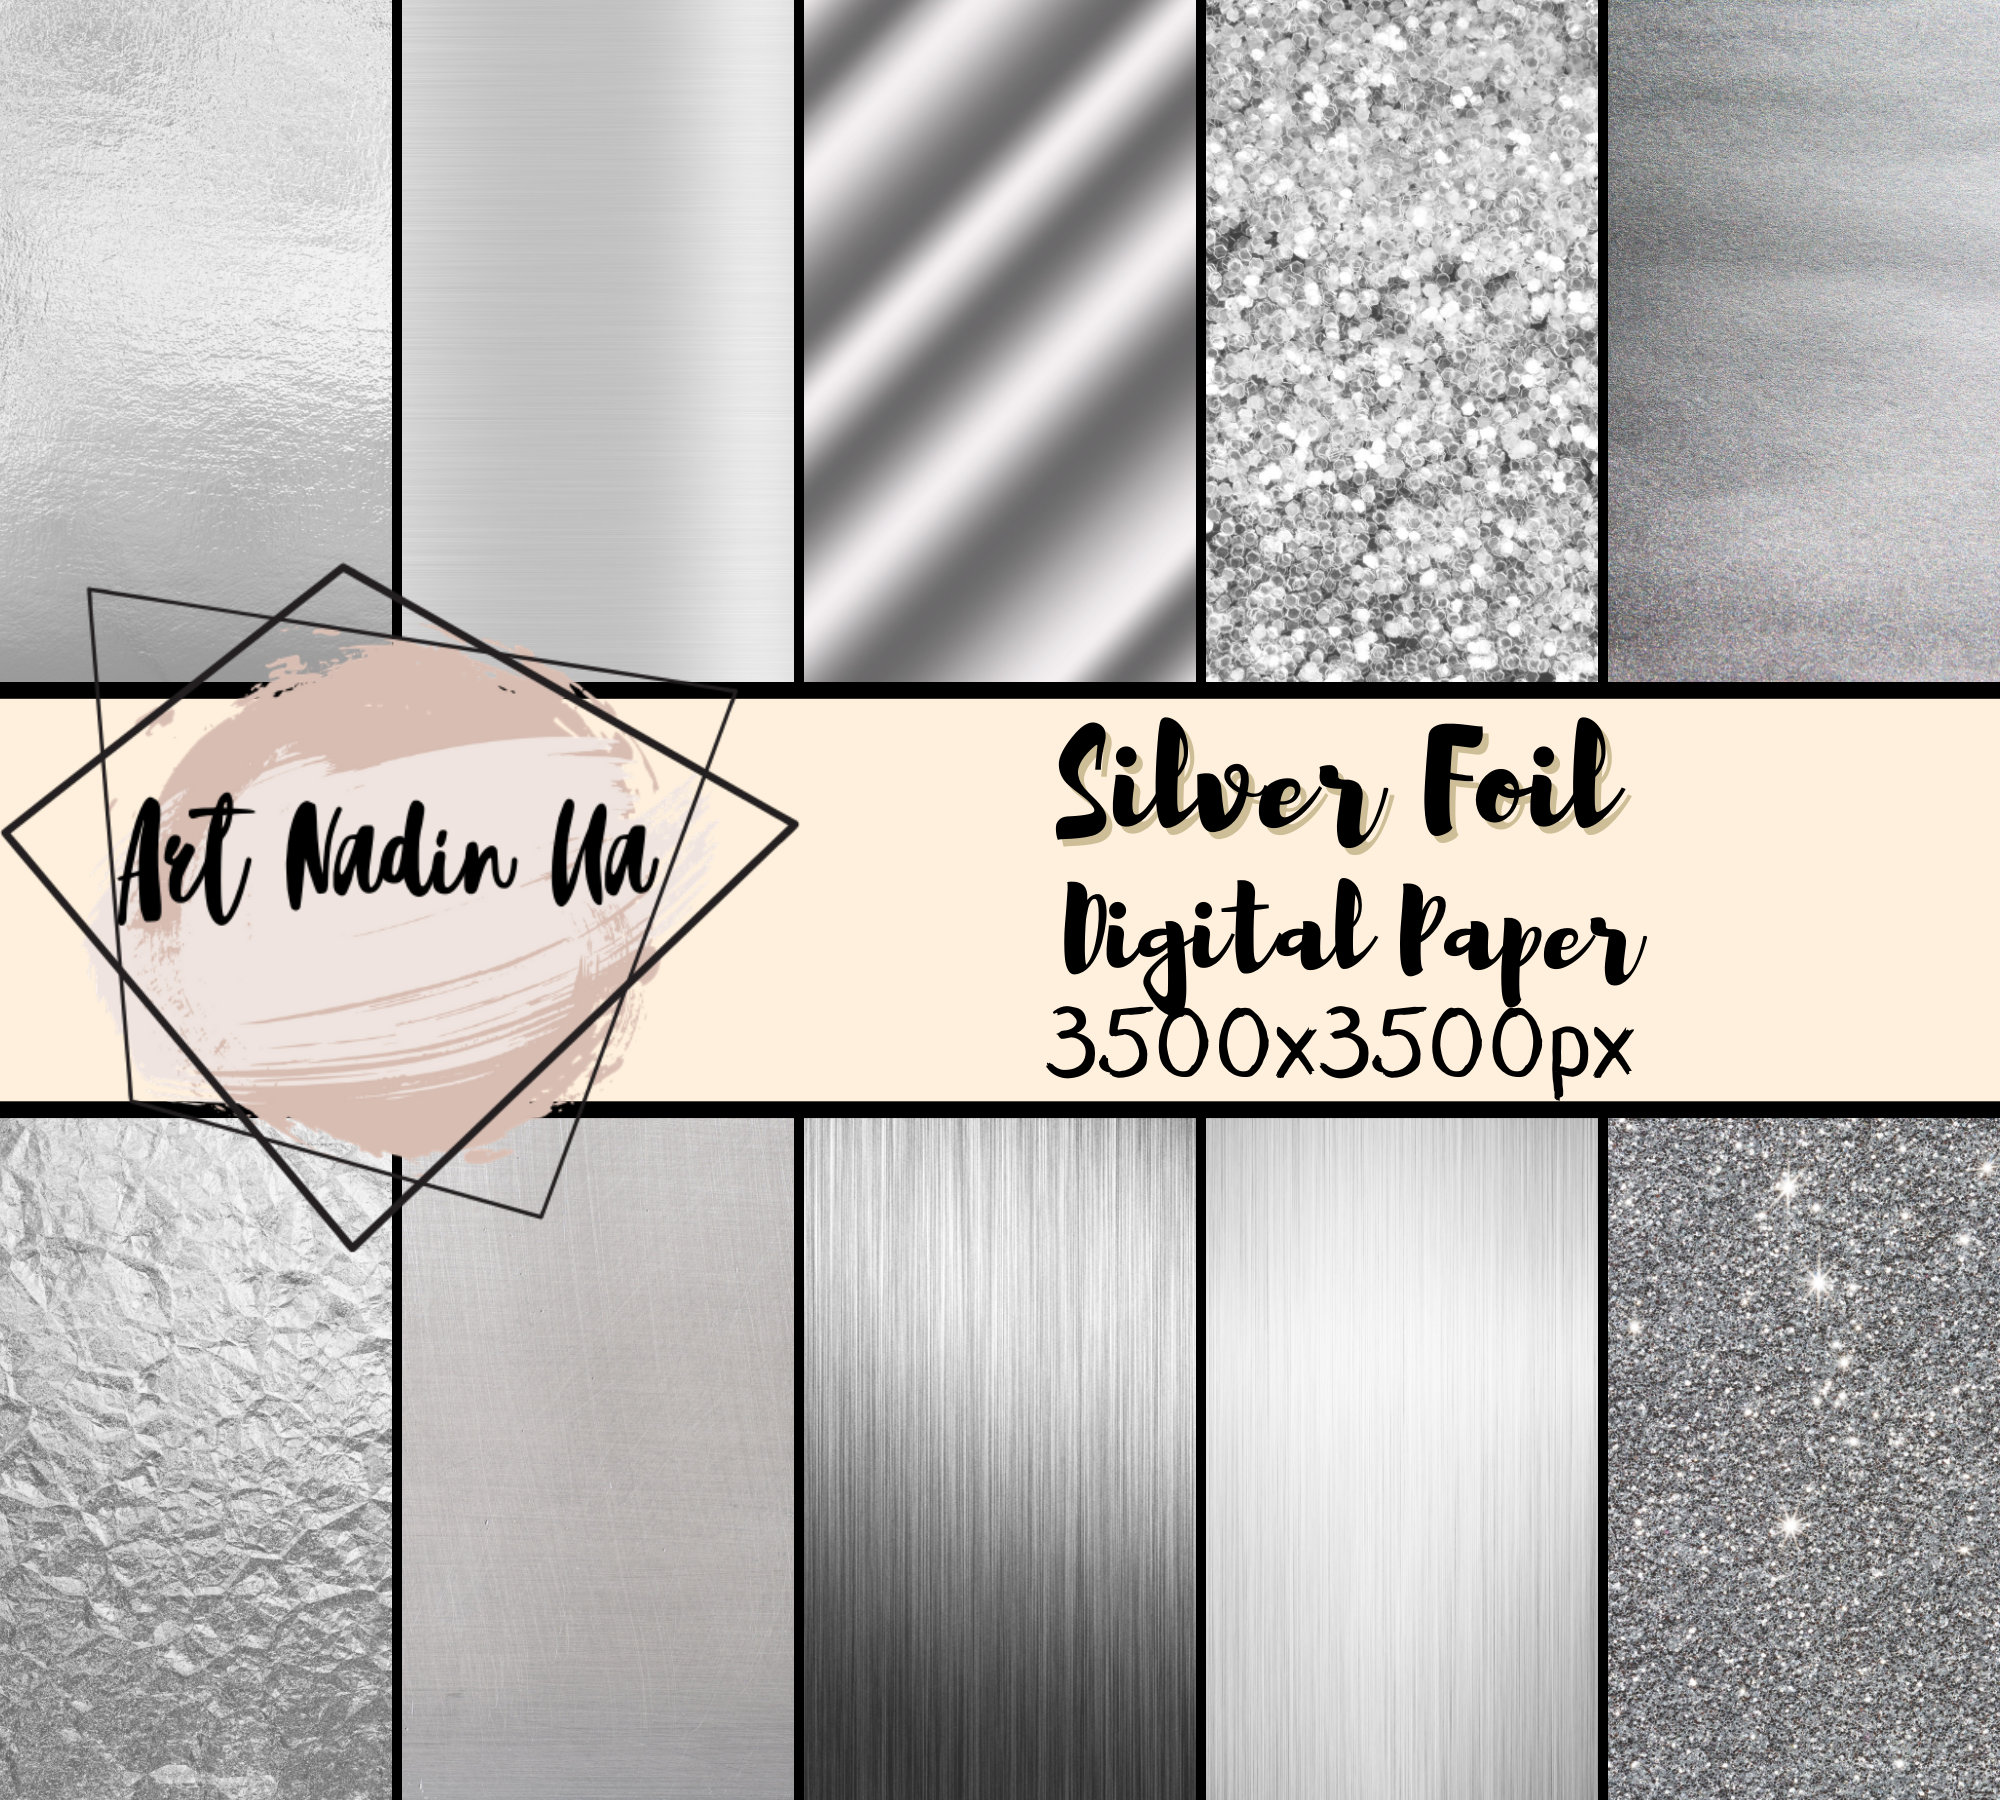 Distinctive Textured Background Of Silver Foil With Distinct Wrinkles  Backgrounds